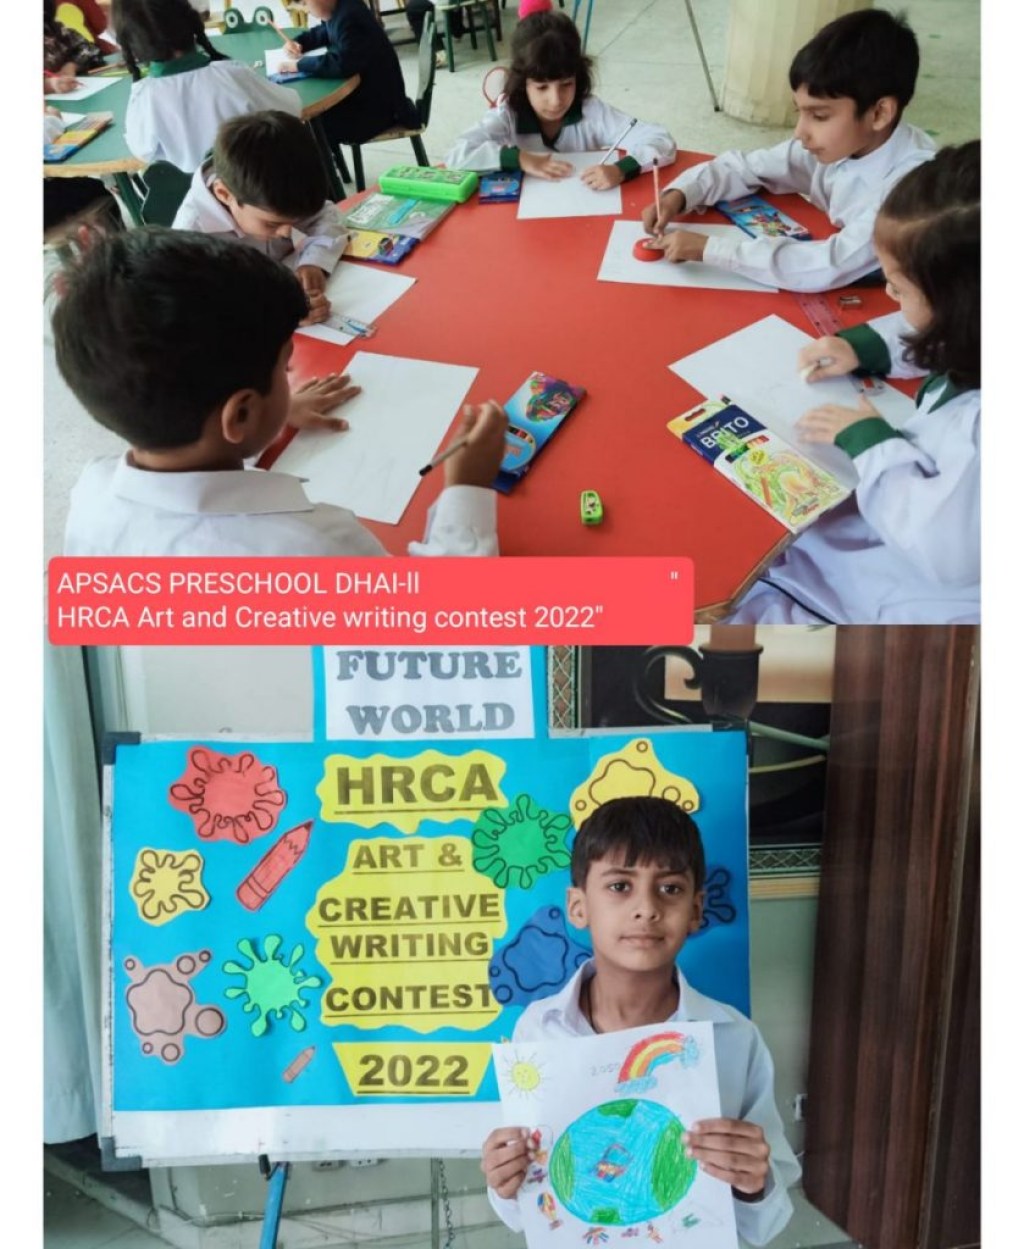 hrca art and creative writing competition 2022